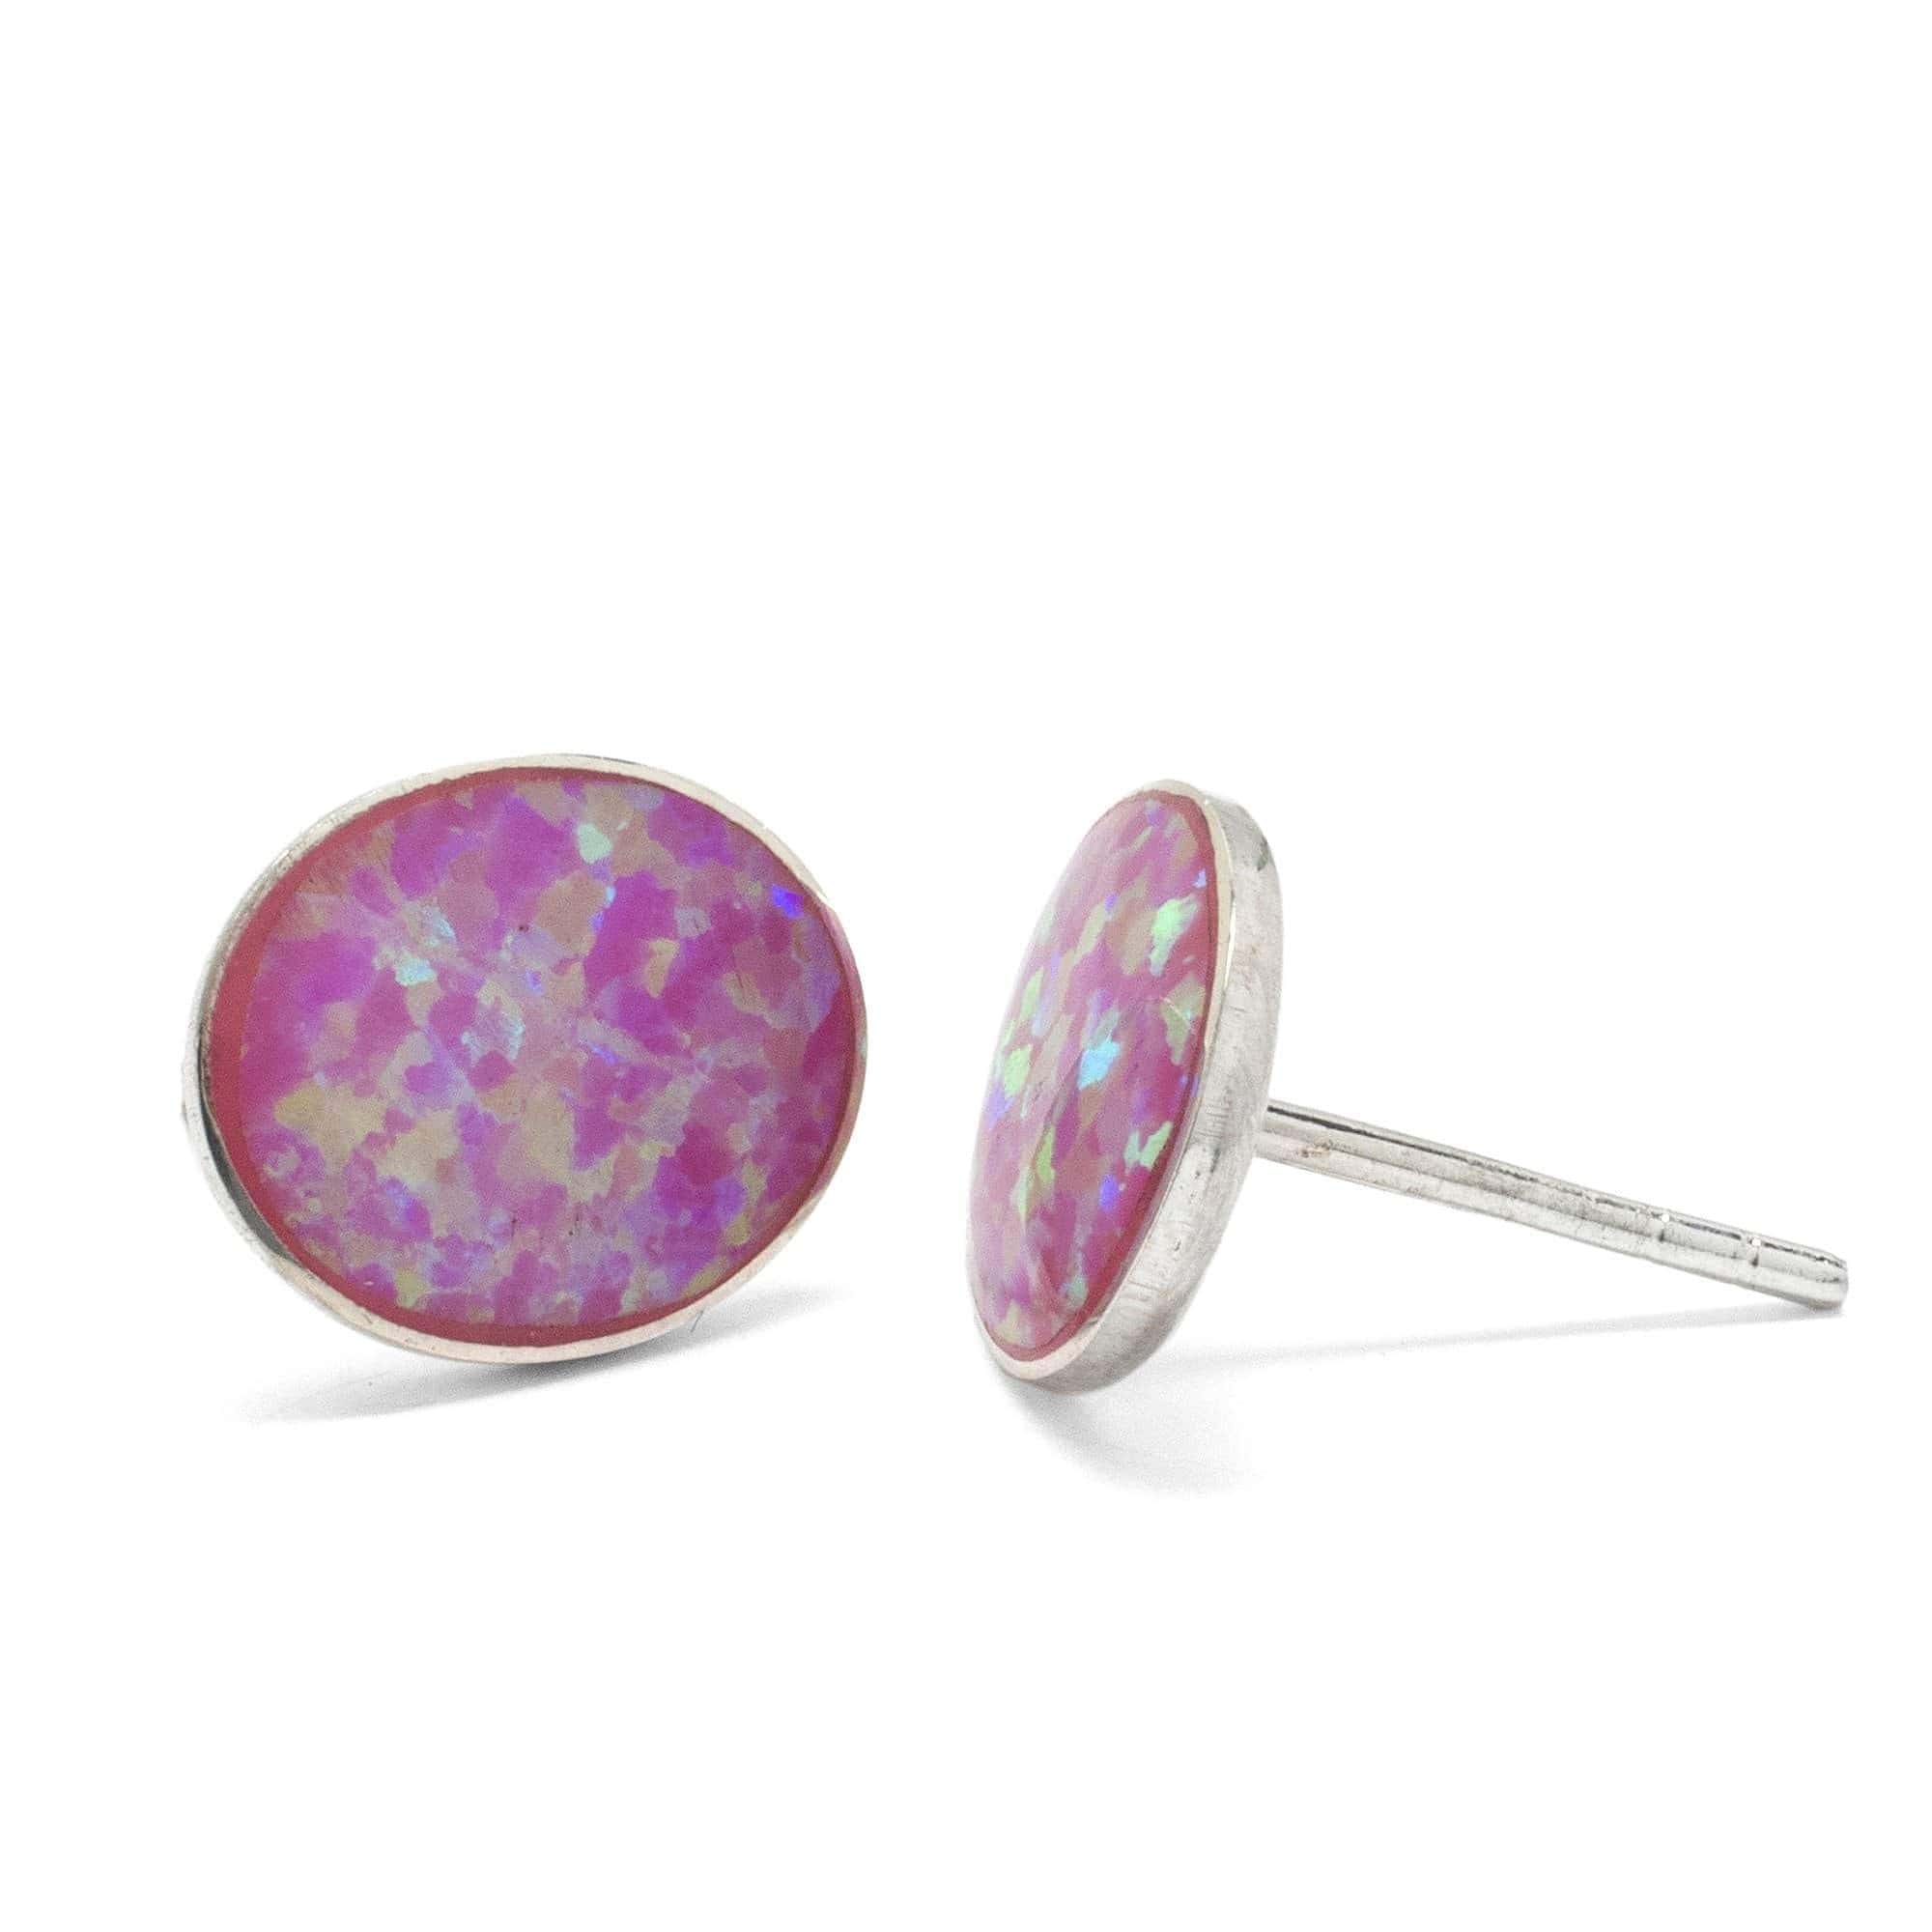 Kalifano Southwest Silver Jewelry Pink Opal Oval 925 Sterling Silver Earring with Stud Backing Handmade NME.0026.PO